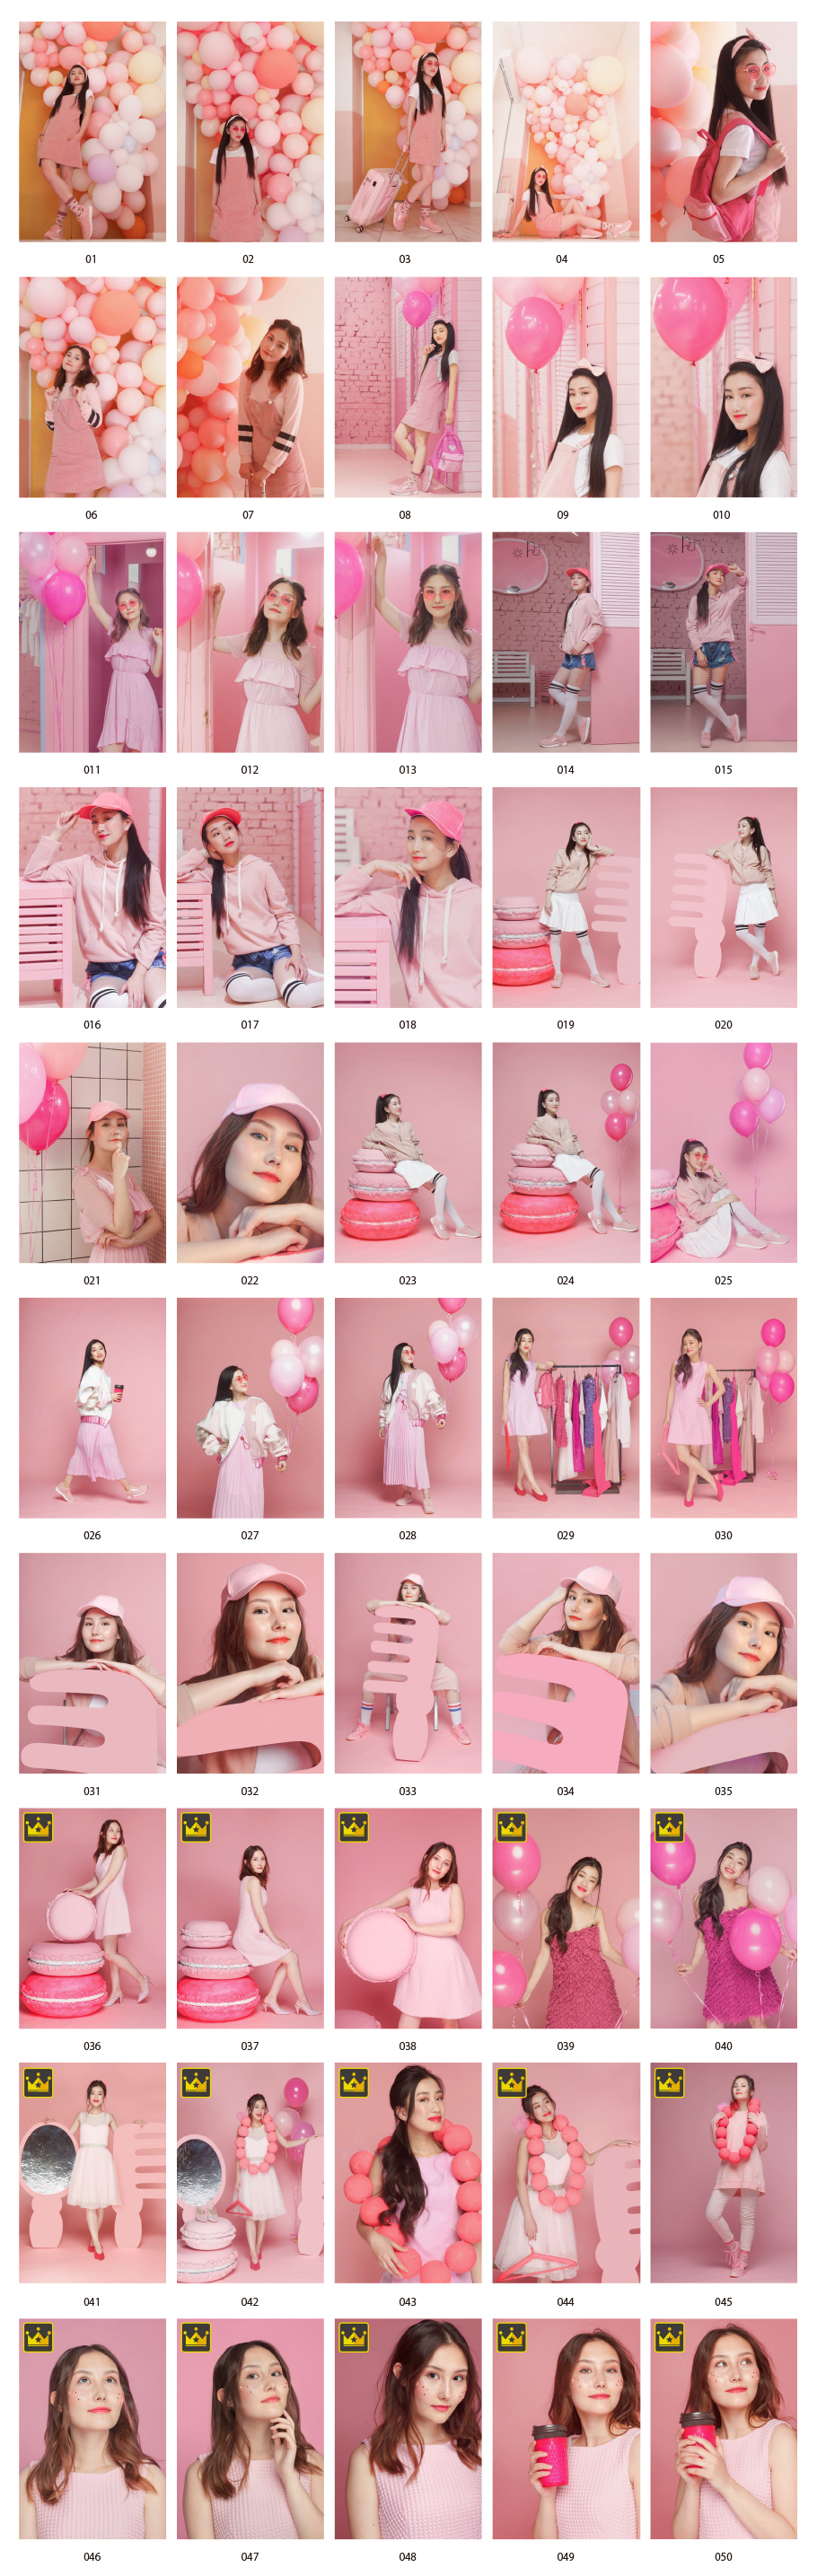 Photo images of the girls in the pink